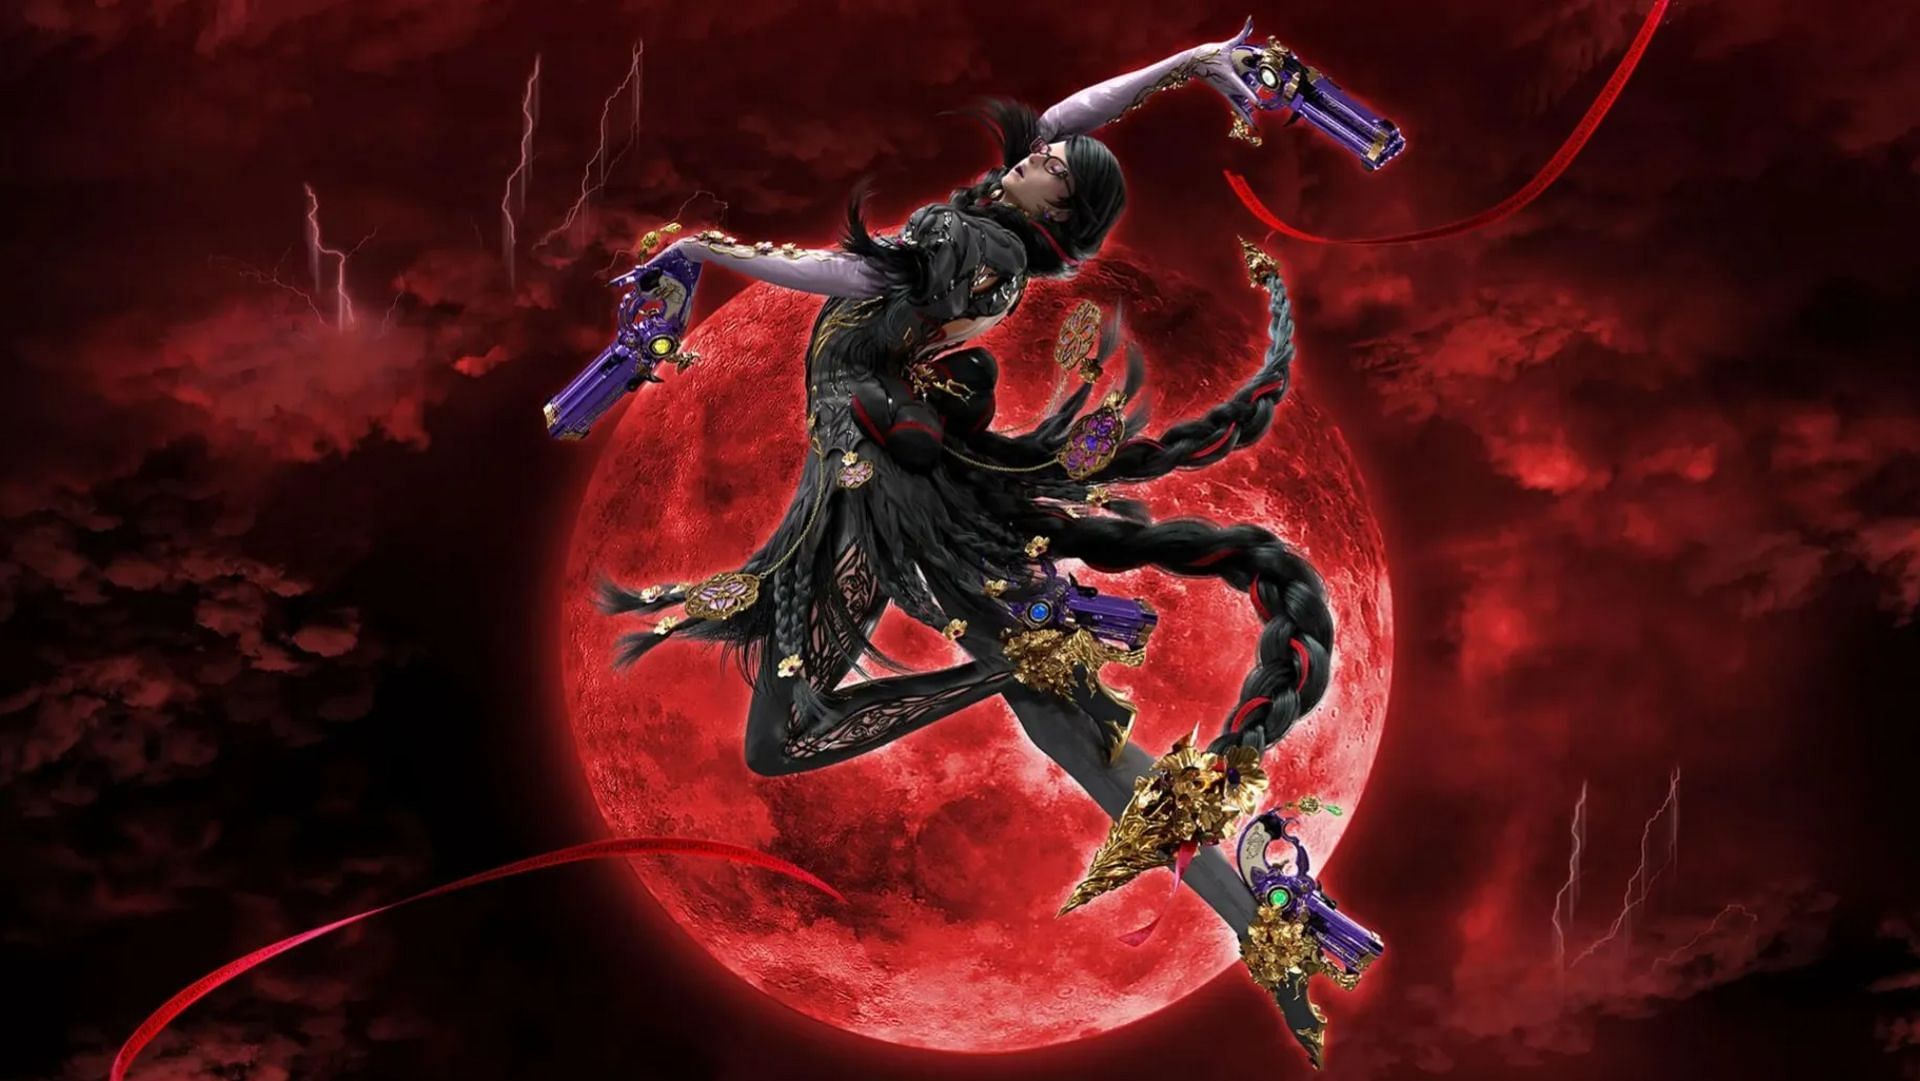 Bayonetta 3 offers a huge roster of bosses for players to go up against (Image via PlatinumGames)